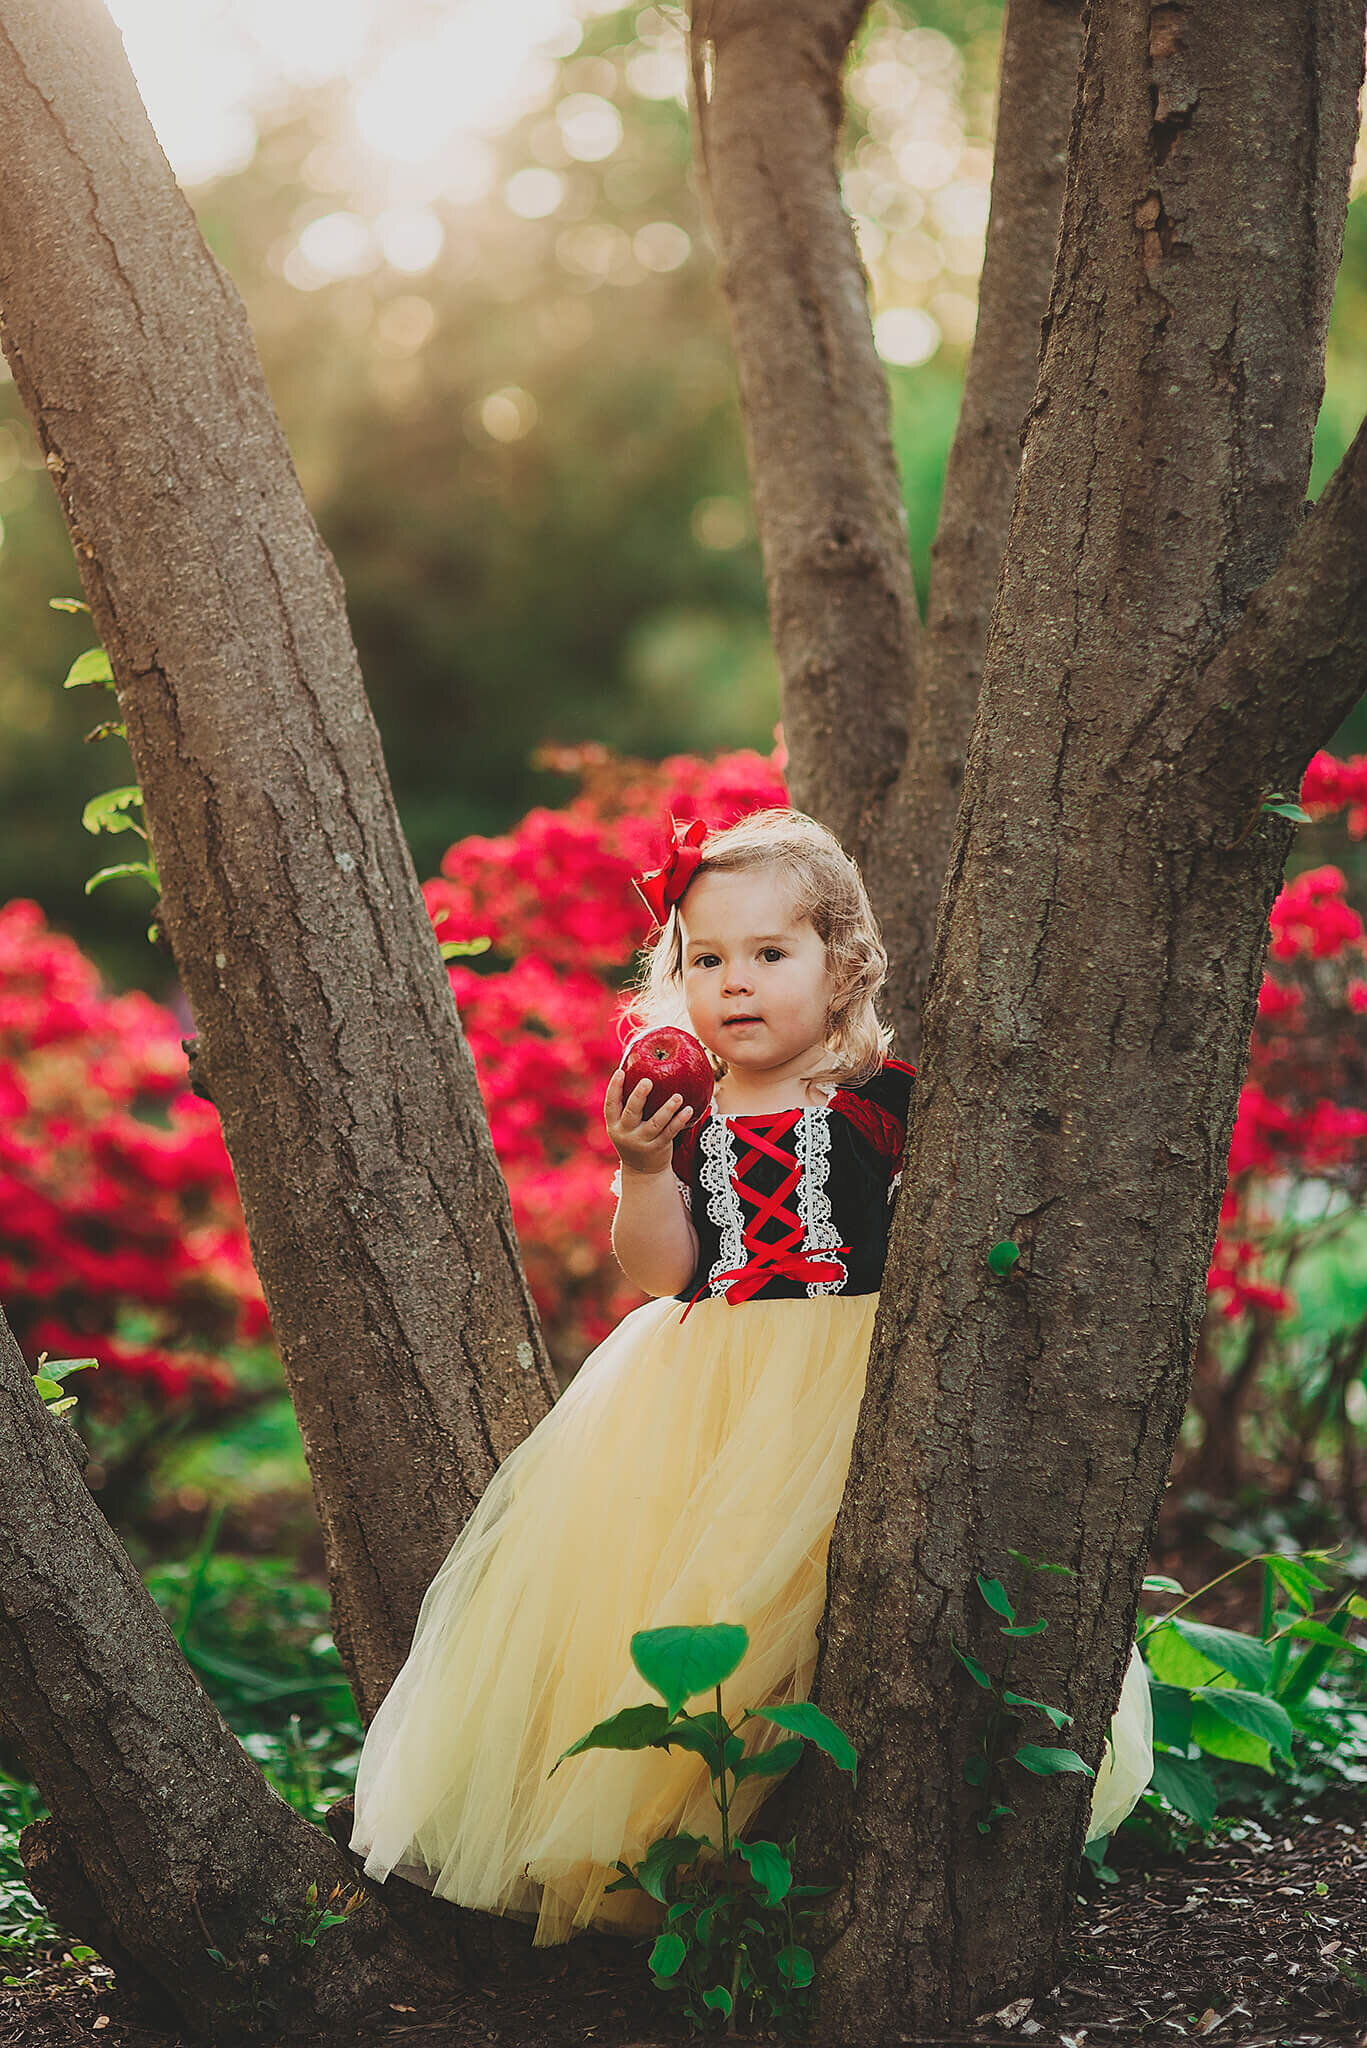 Little Girl dressed as snow white eating a red apple leaning on a tree near red flowers at Sherwood Gardens in Baltimore Maryland